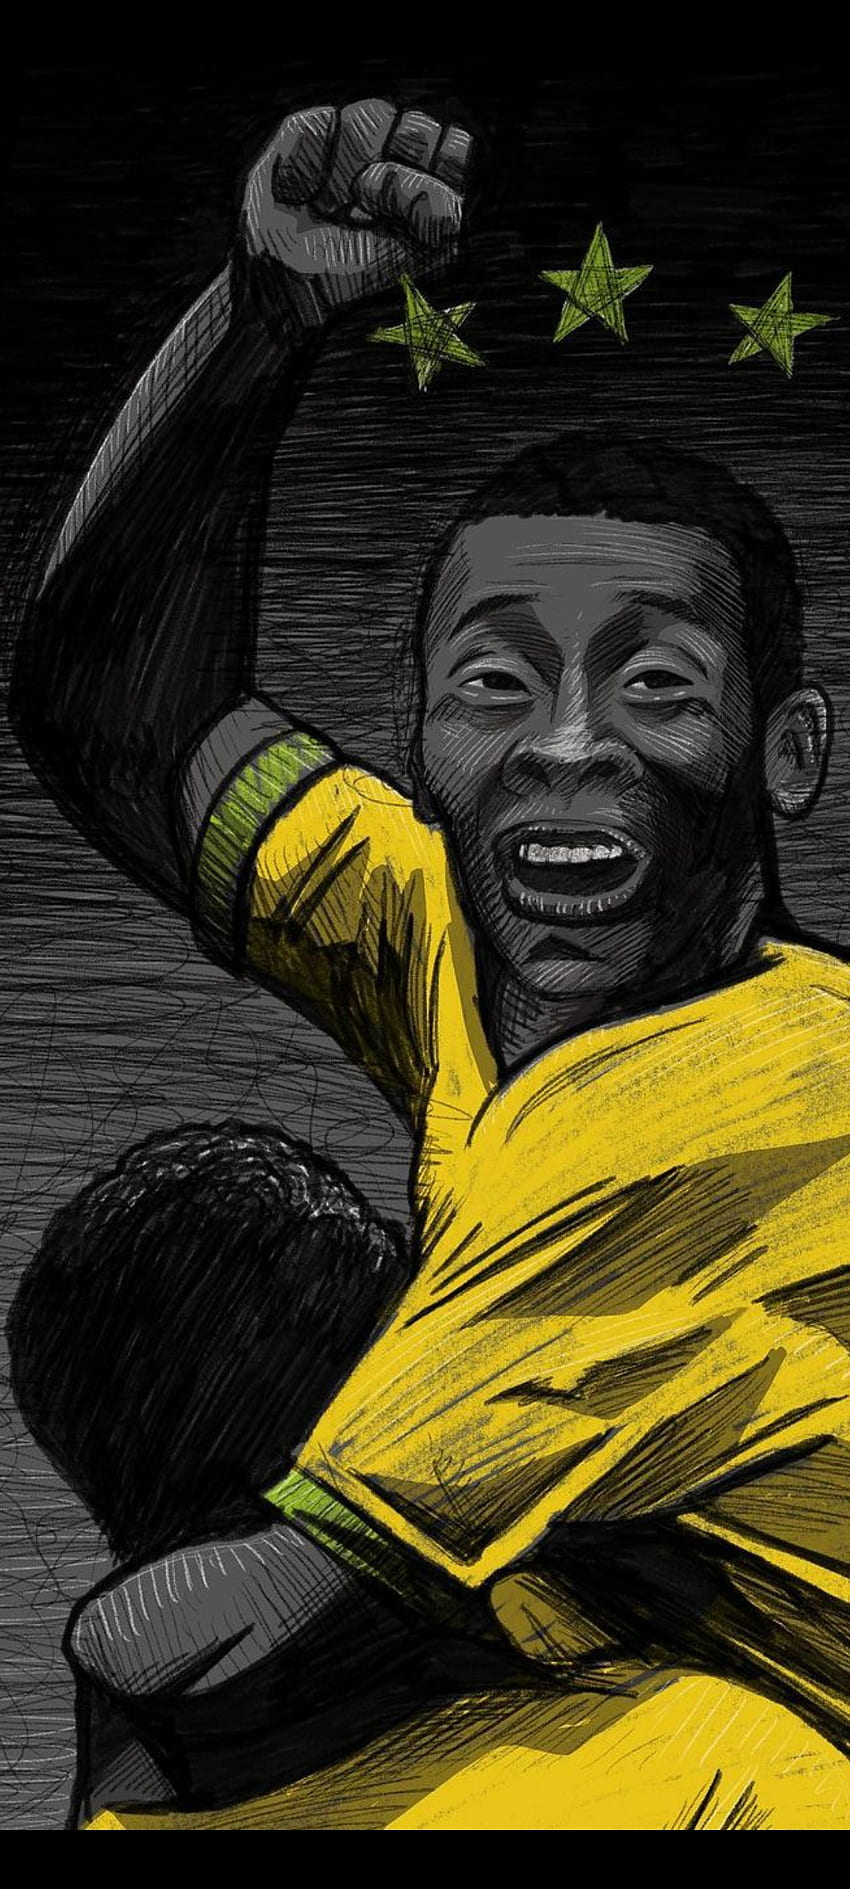 Download Pele Wallpapers HD 4k Free for Android - Pele Wallpapers HD 4k APK  Download - STEPrimo.com